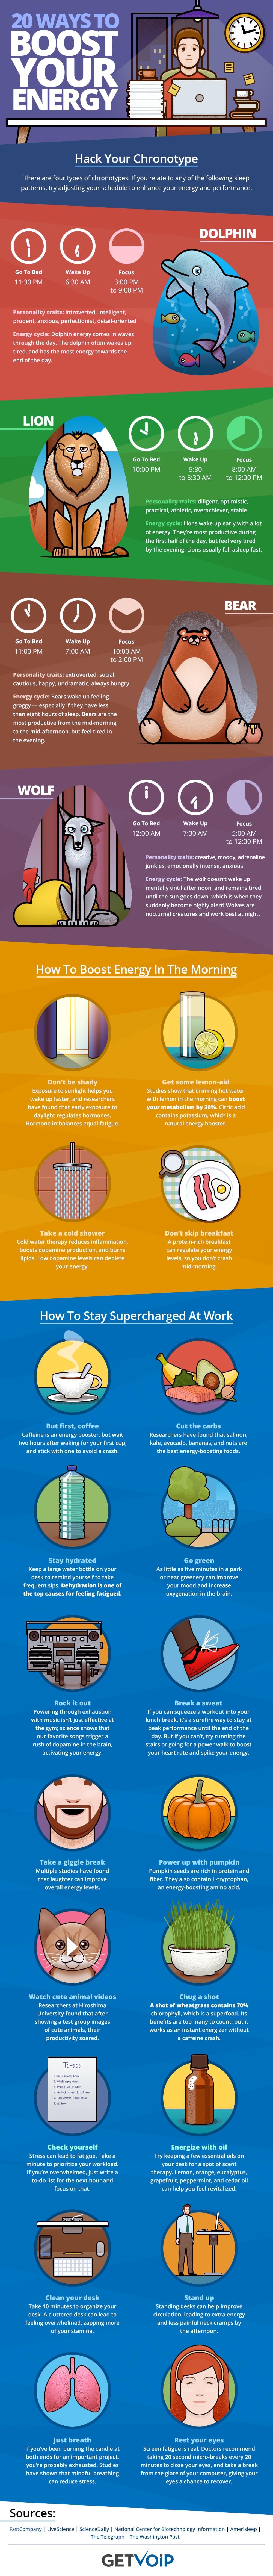 how to boost energy at work infographic